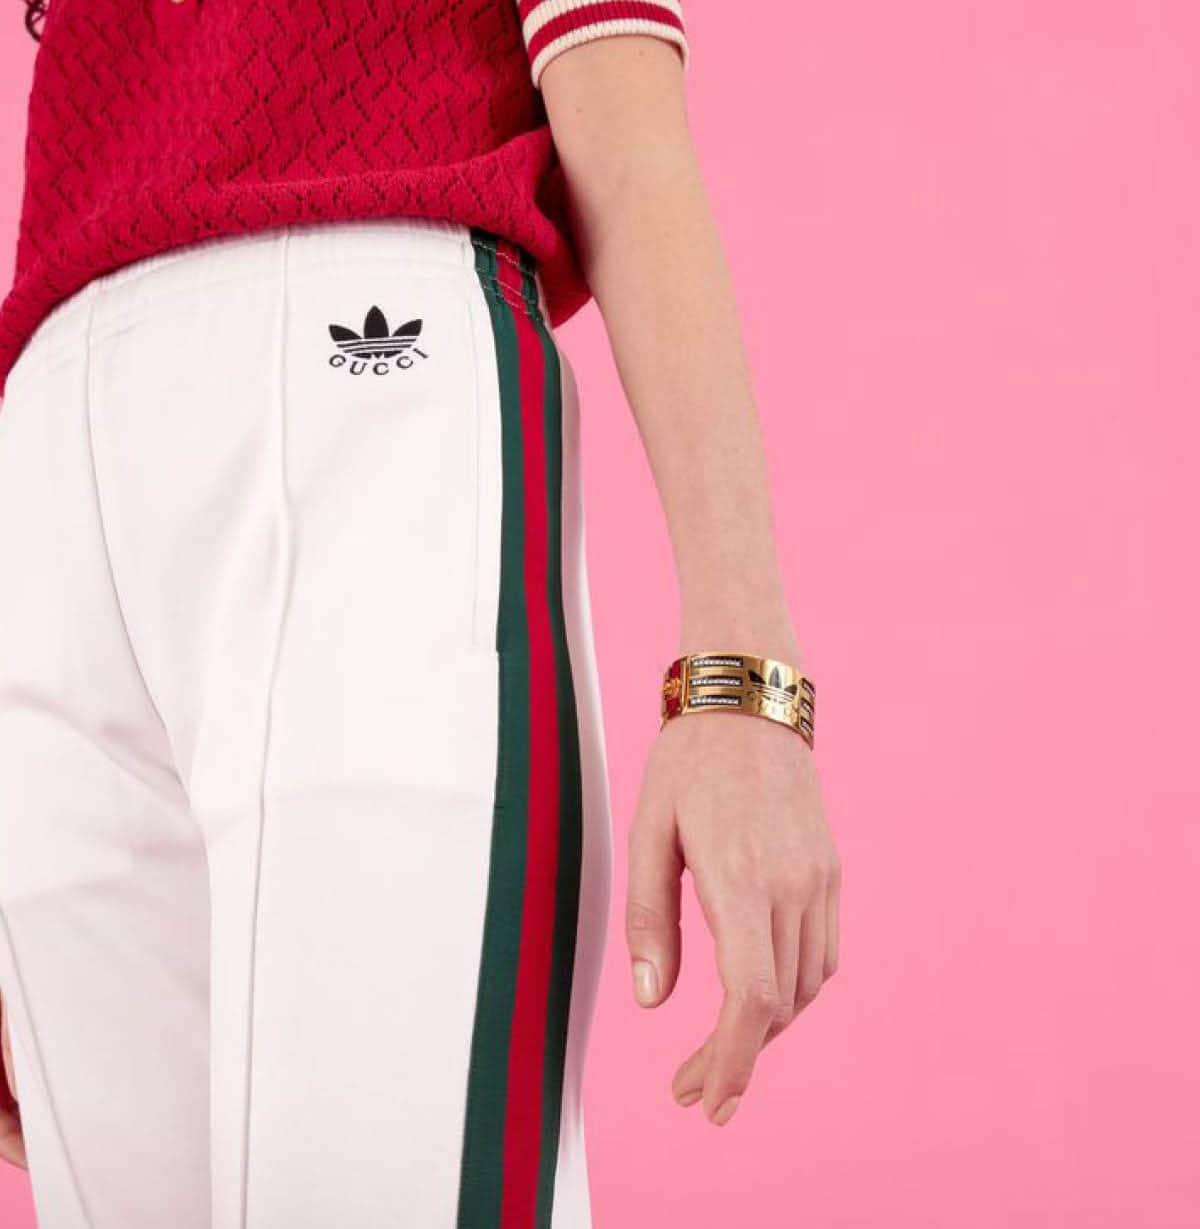 Unique gifts for her - funky adidas gucci joggers and bracelet